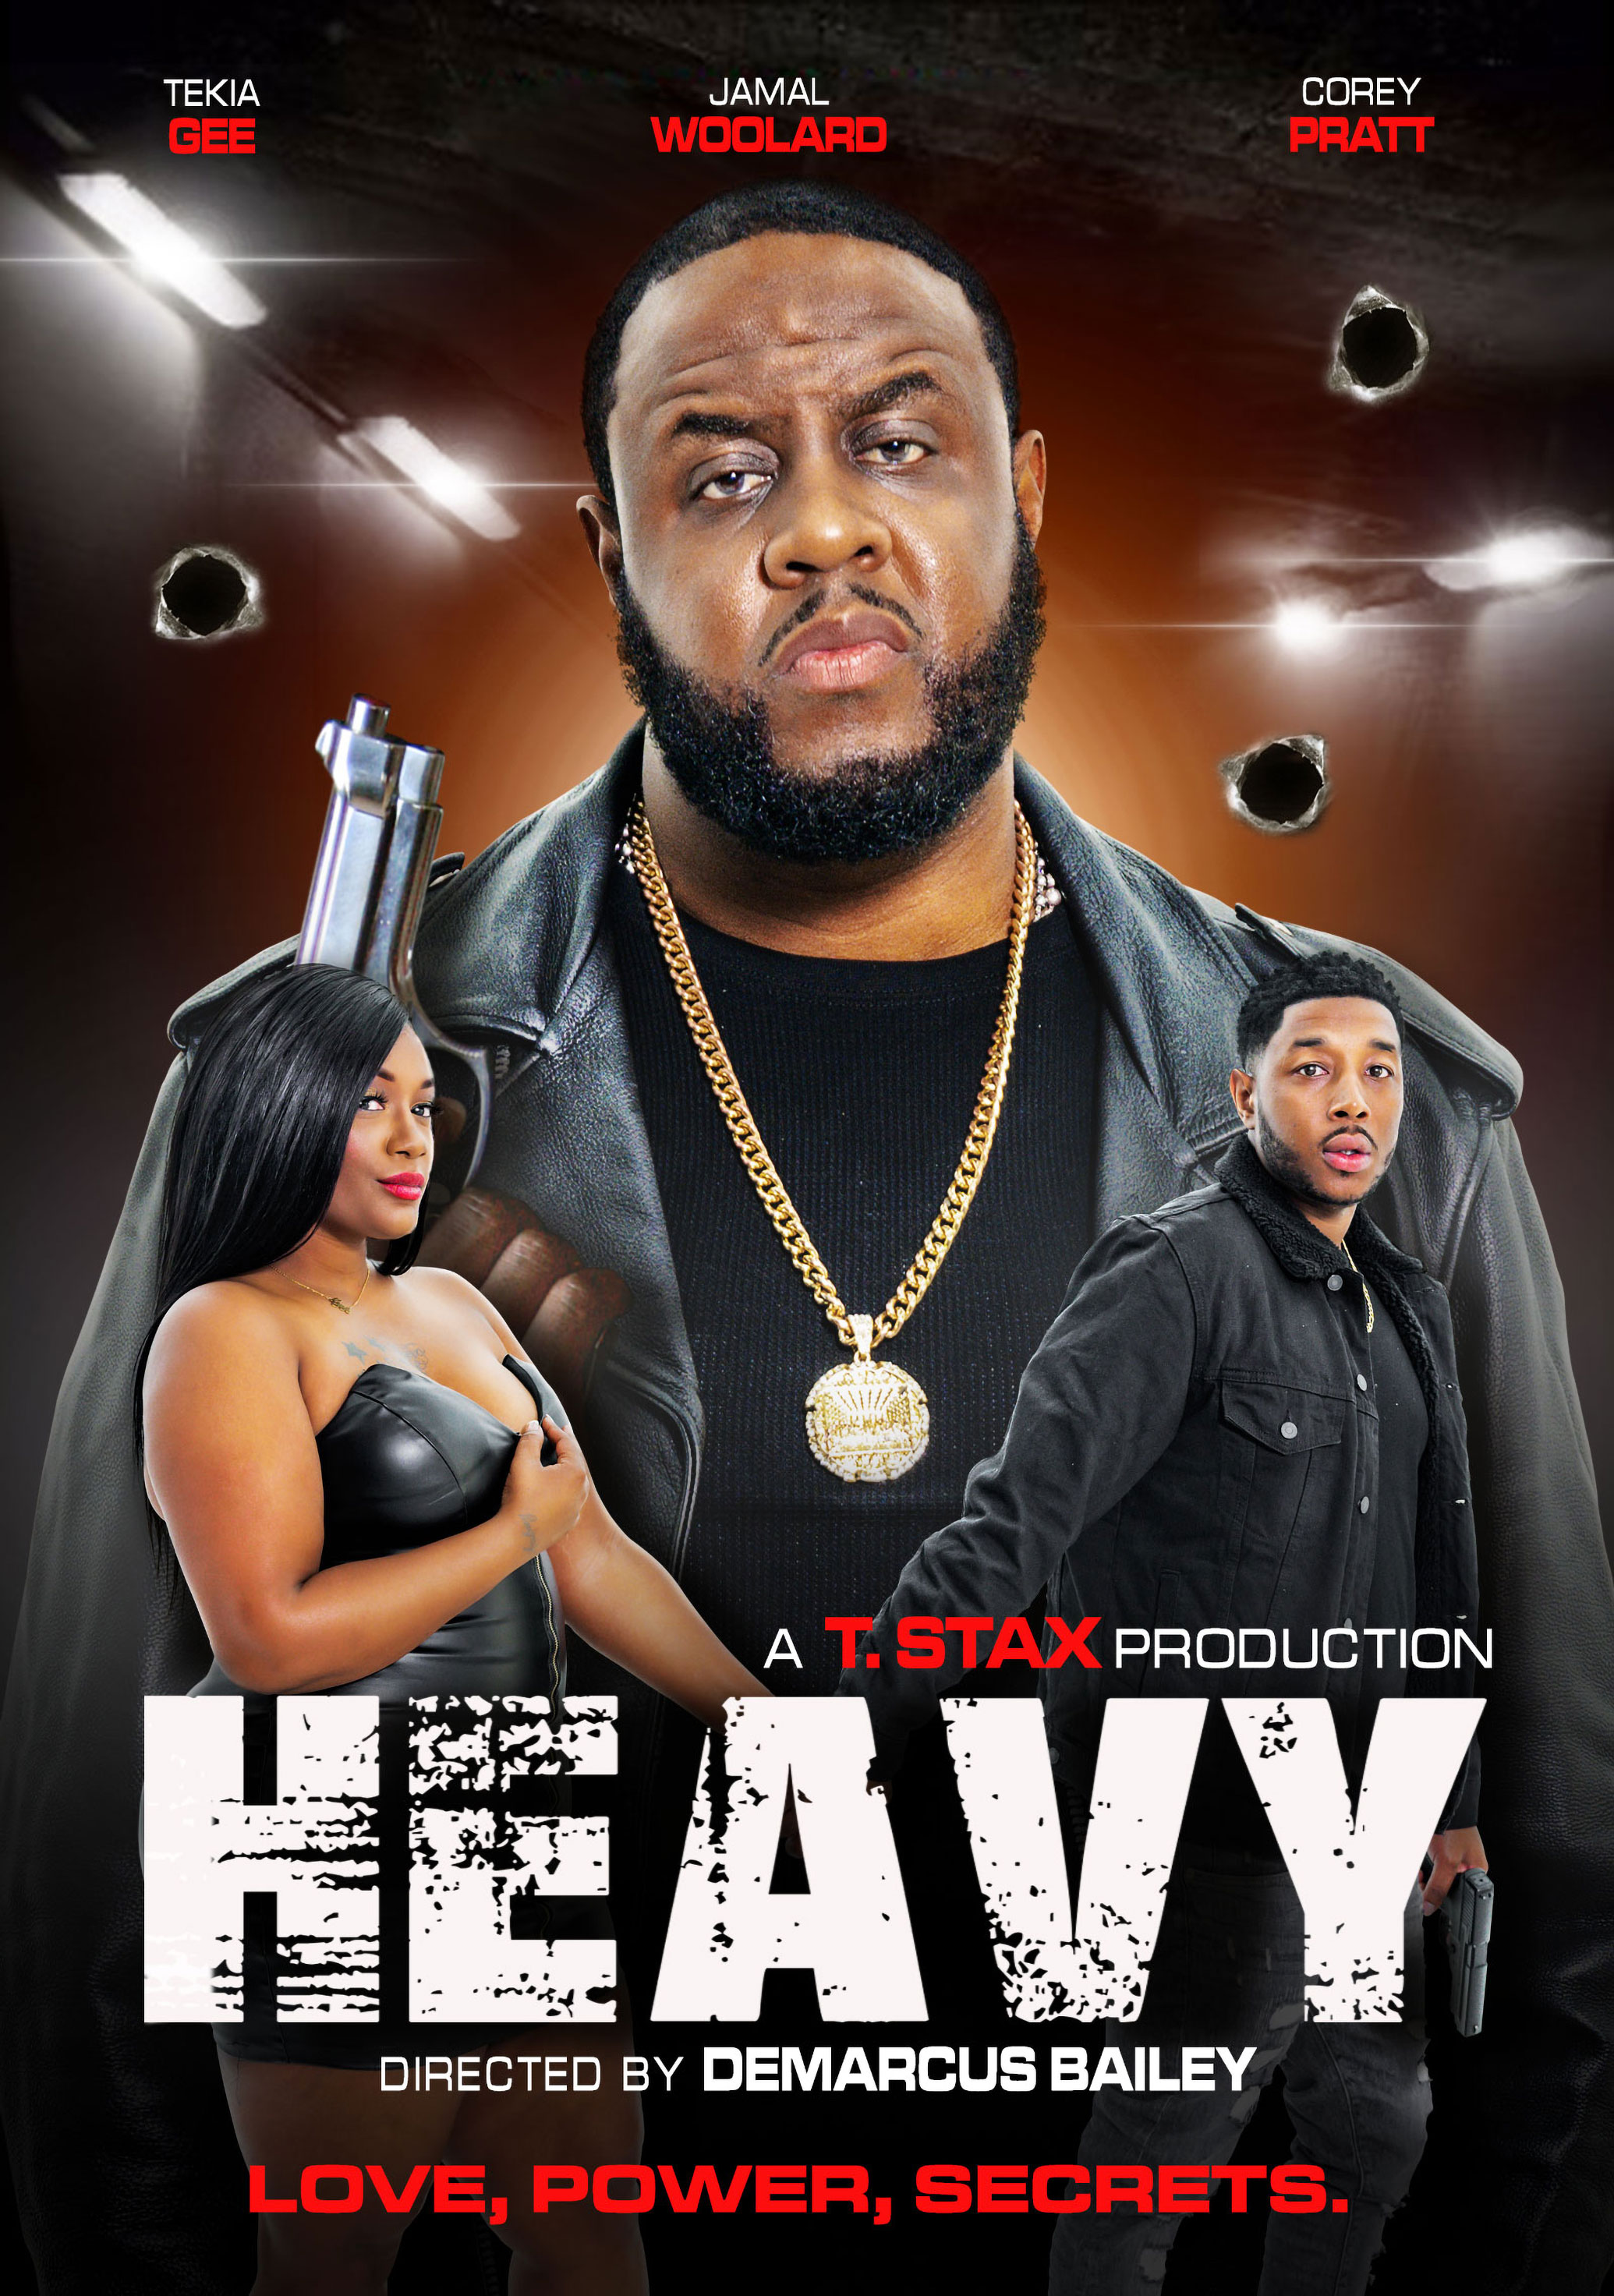 Heavy (2020) Drama, Directed By DeMarcus Bailey